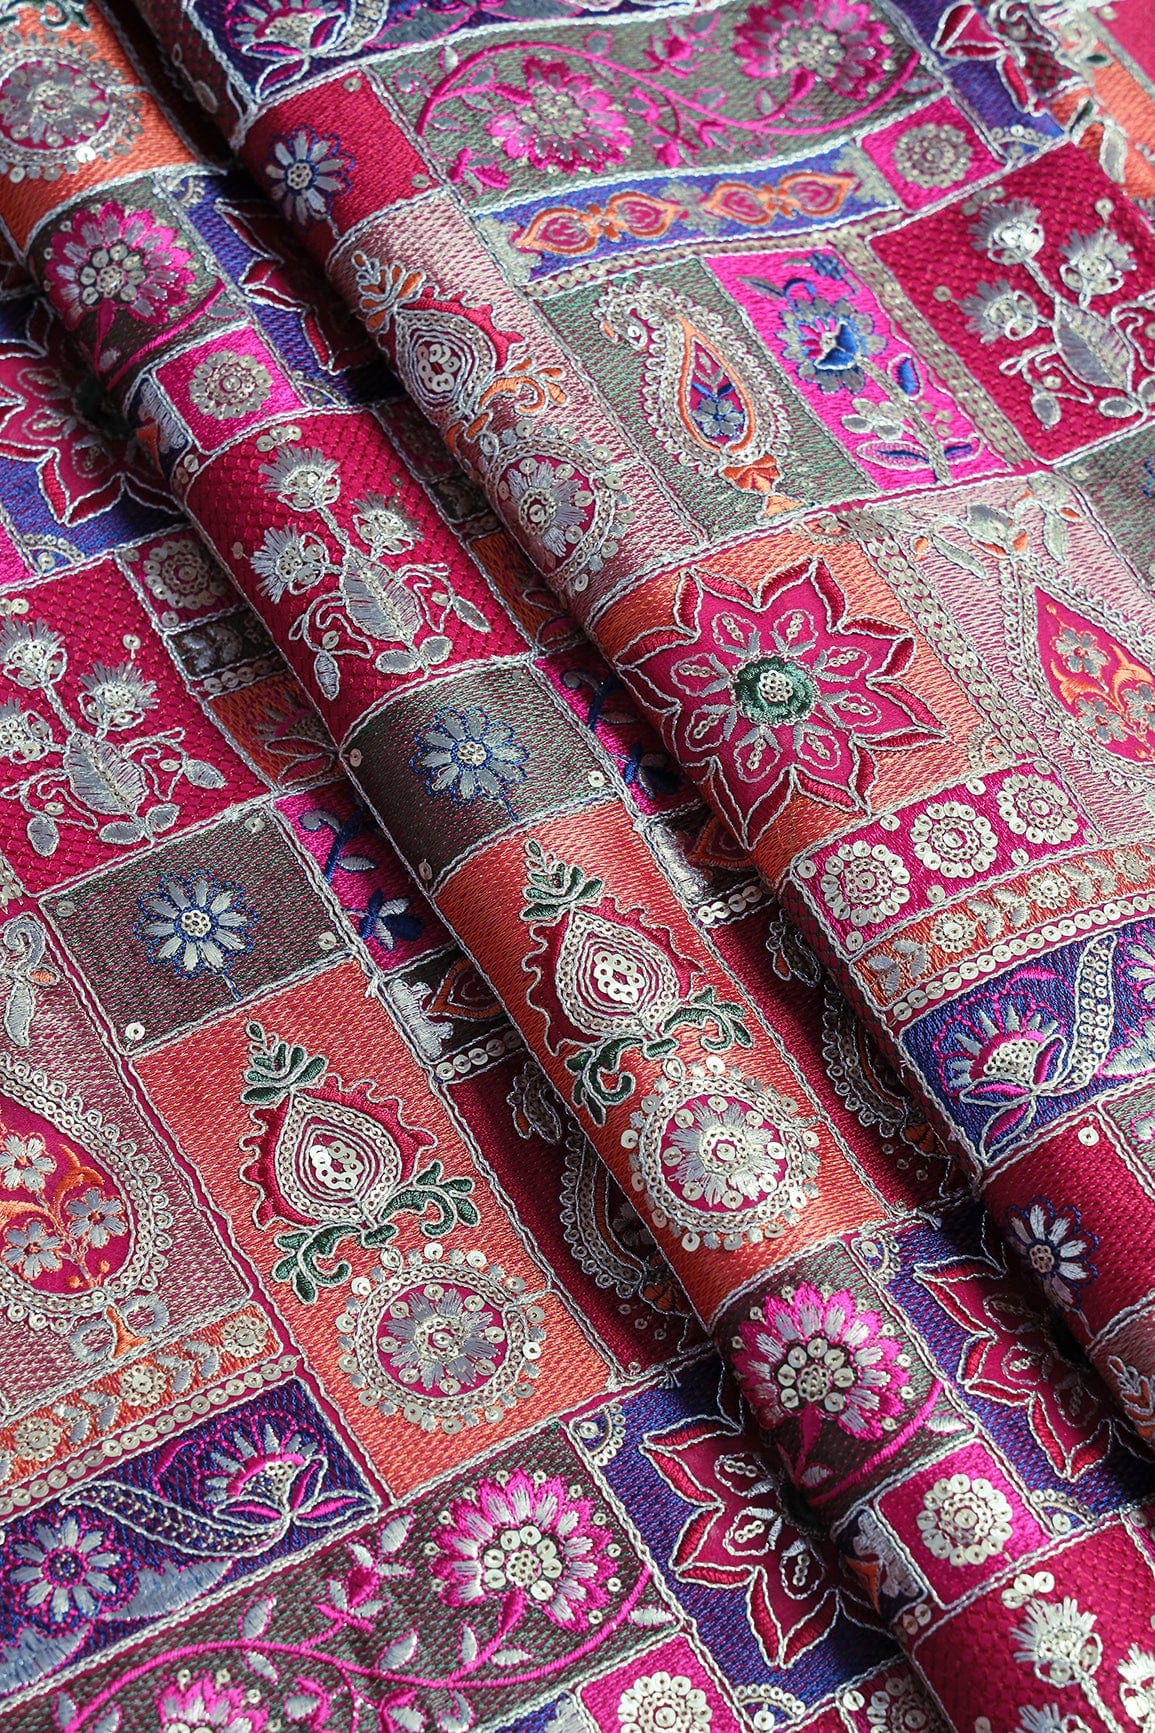 doeraa Embroidery Fabrics Multi Color Thread With Gold Sequins Traditional Embroidery On Fuchsia Viscose Georgette Fabric